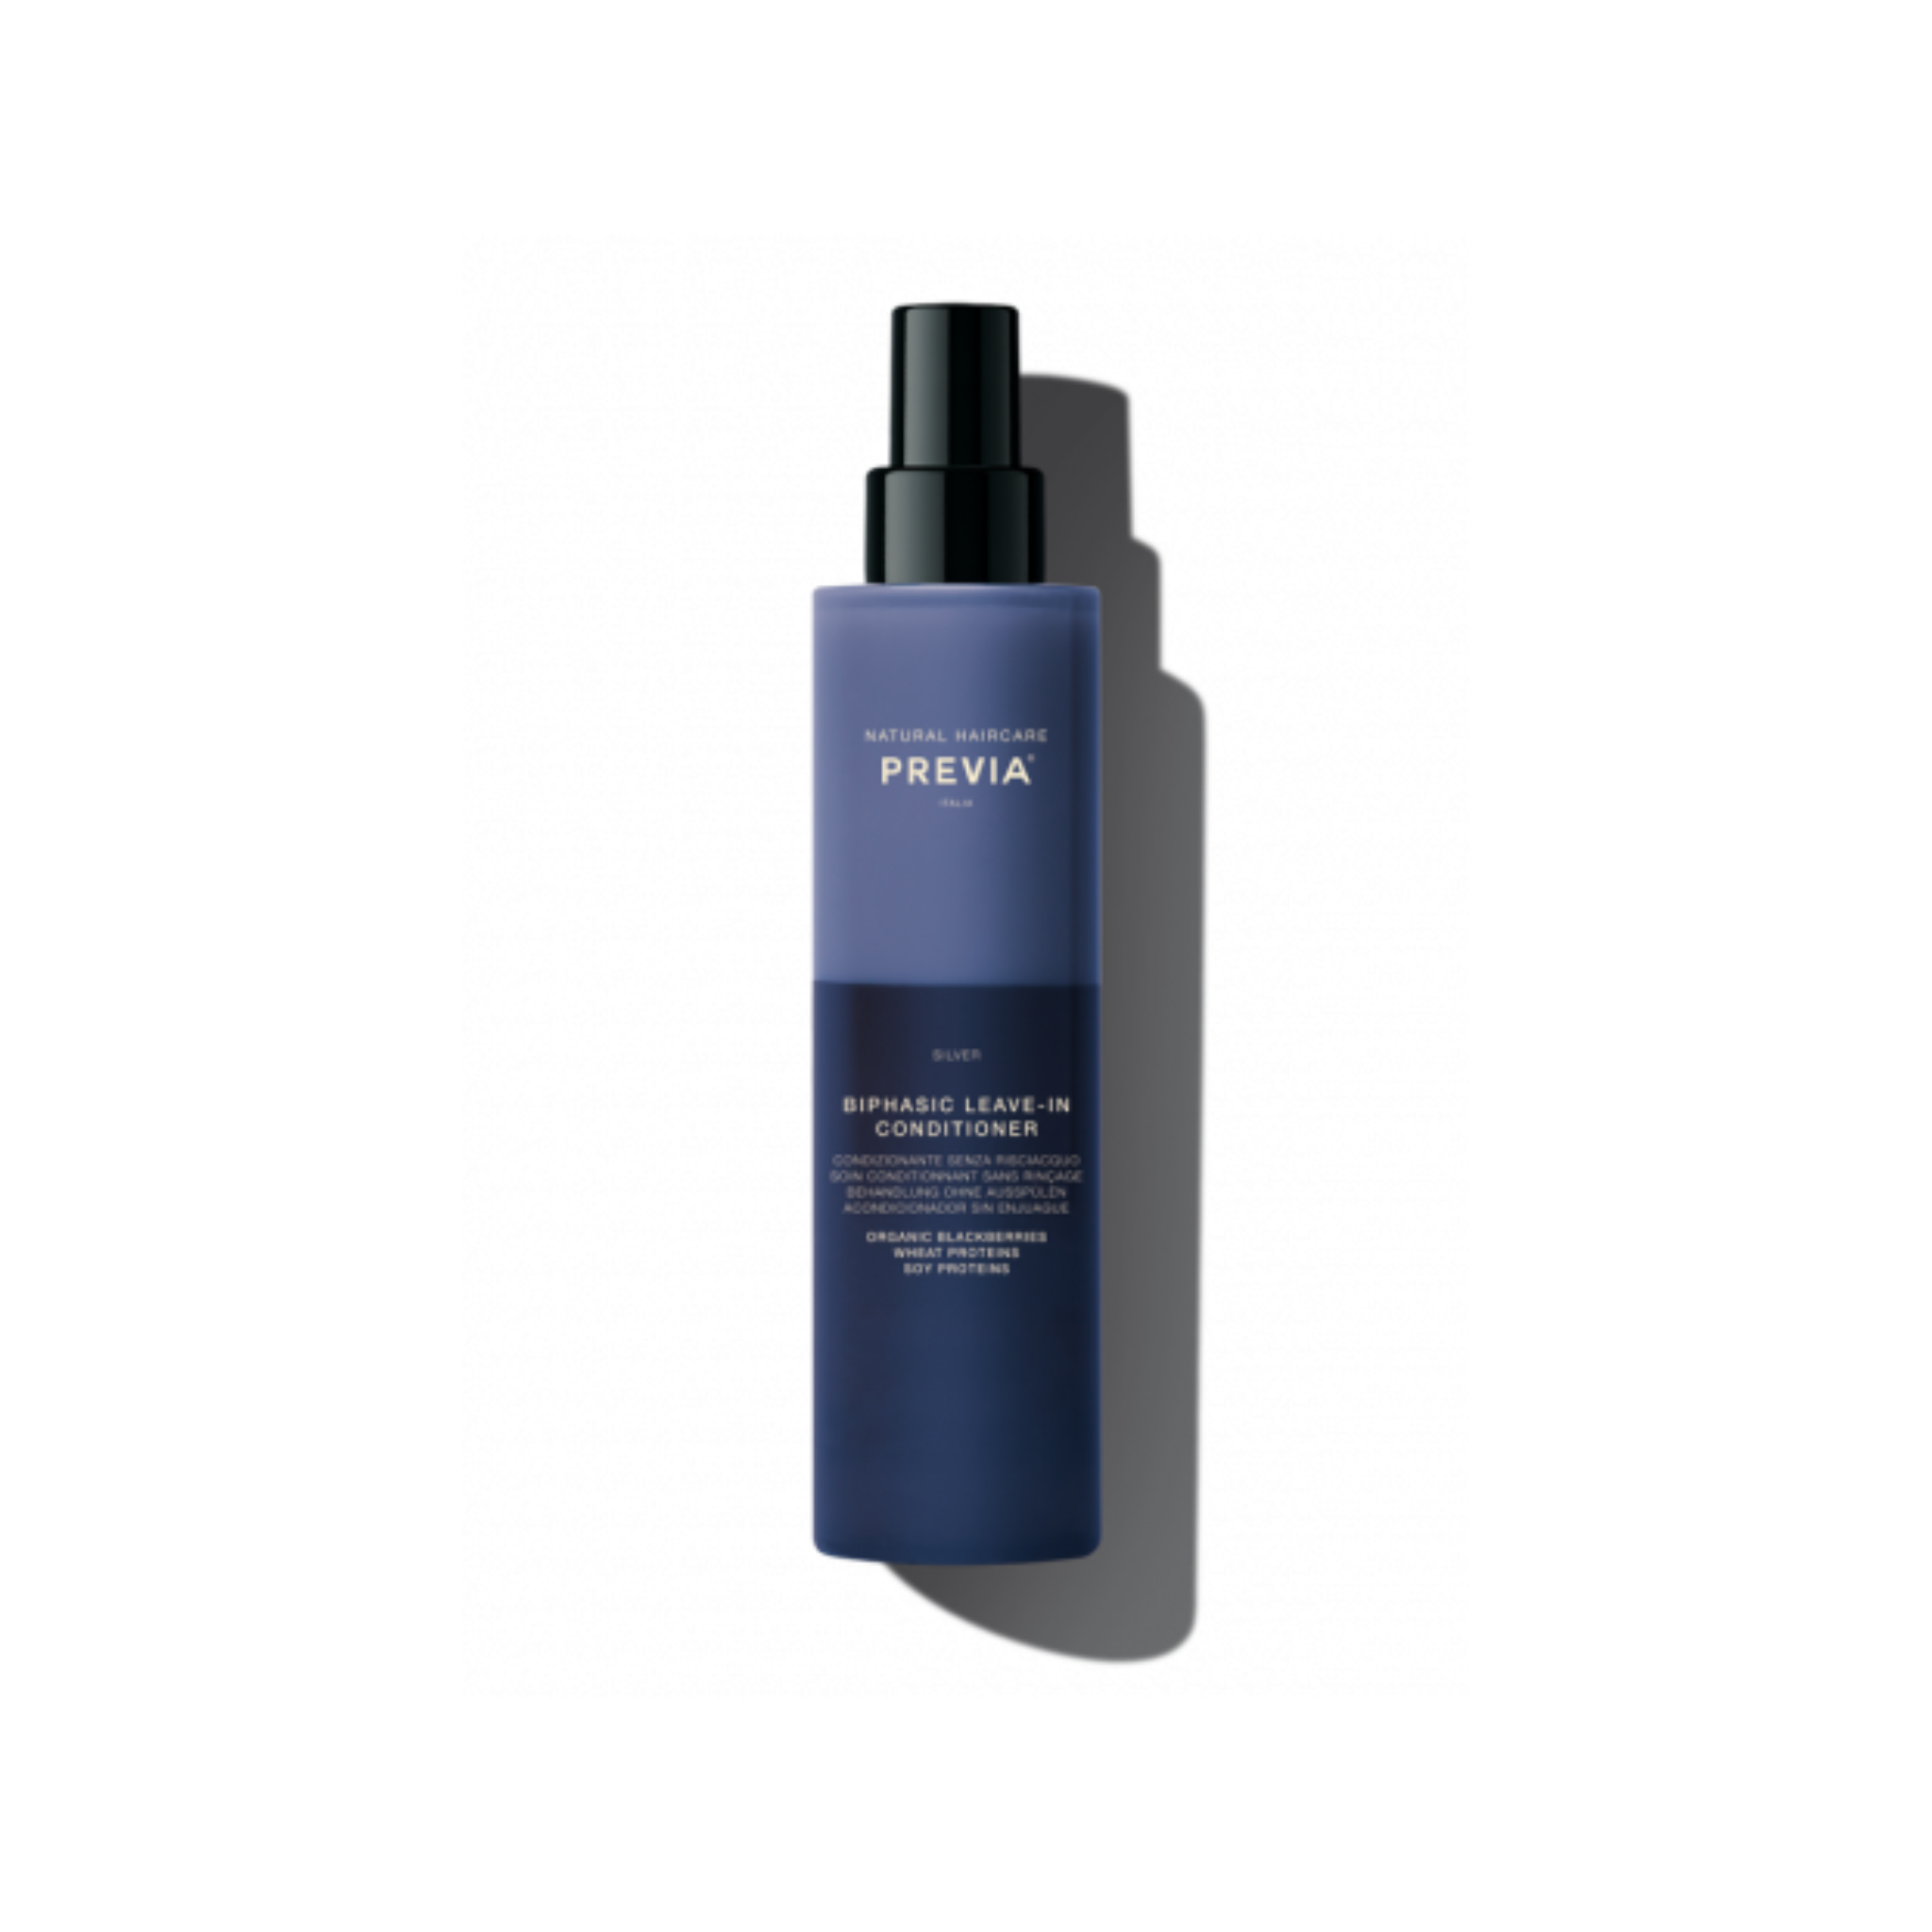 Blonde Silver Biphasic Leave-In Conditioner